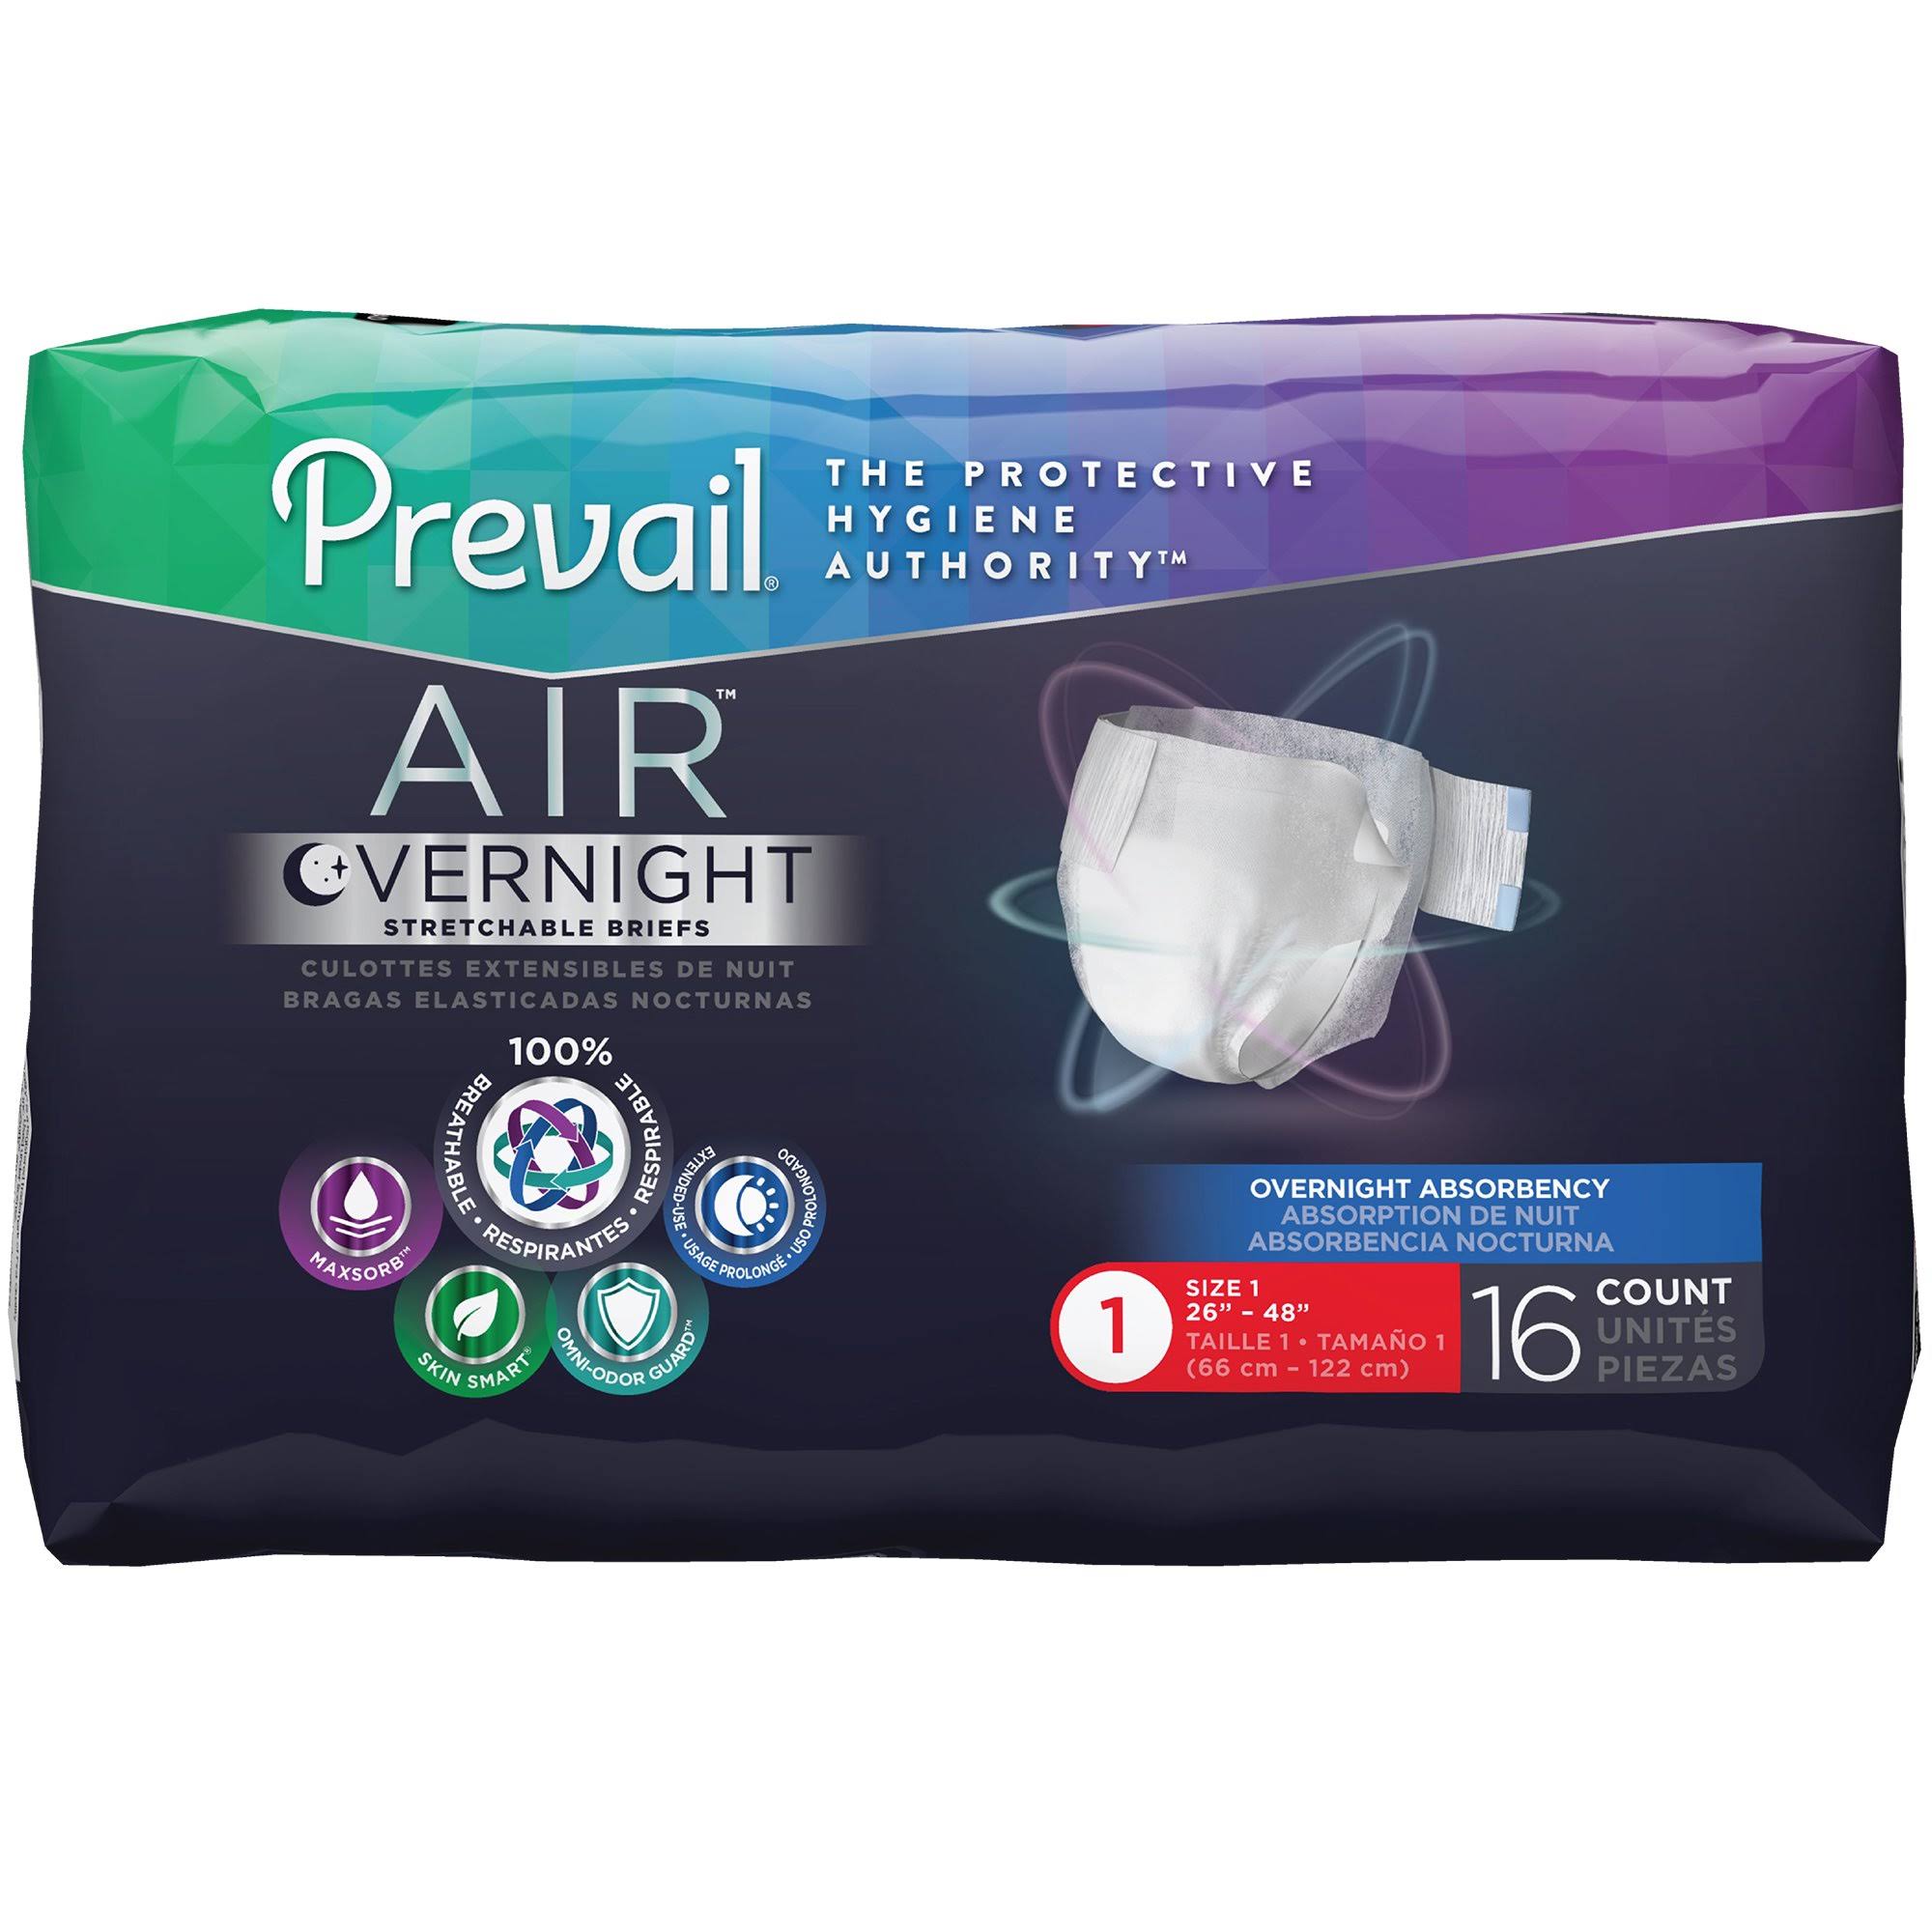 Prevail Air Overnight Incontinence Brief - Size 3 - Bag of 15